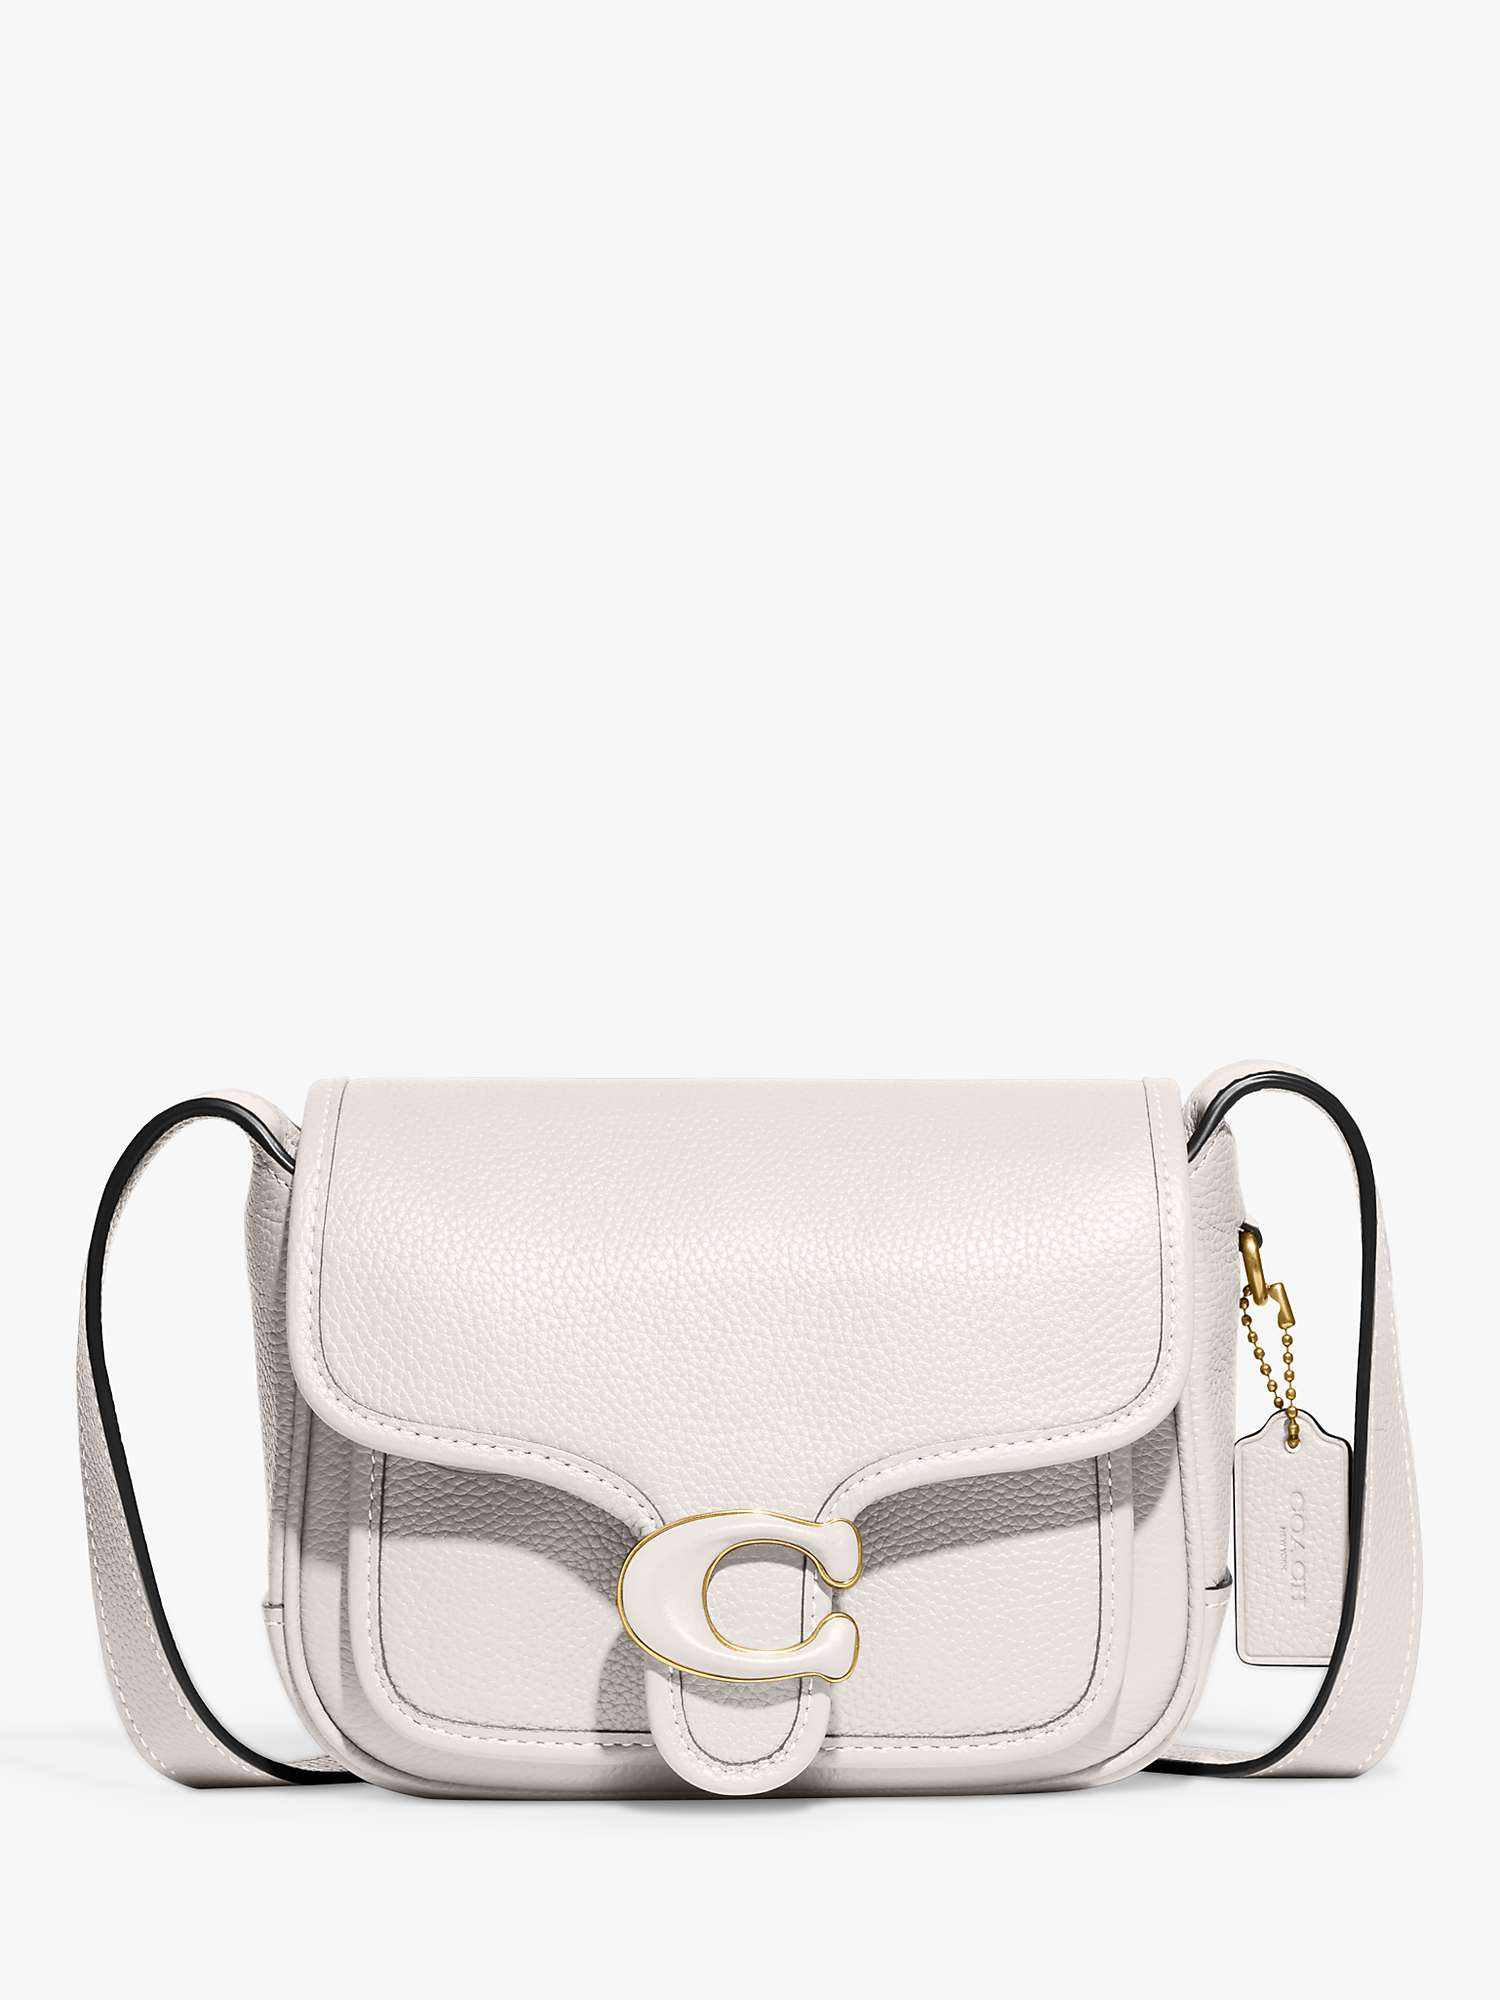 Coach Tabby 19 Leather Messenger Bag, Chalk at John Lewis & Partners